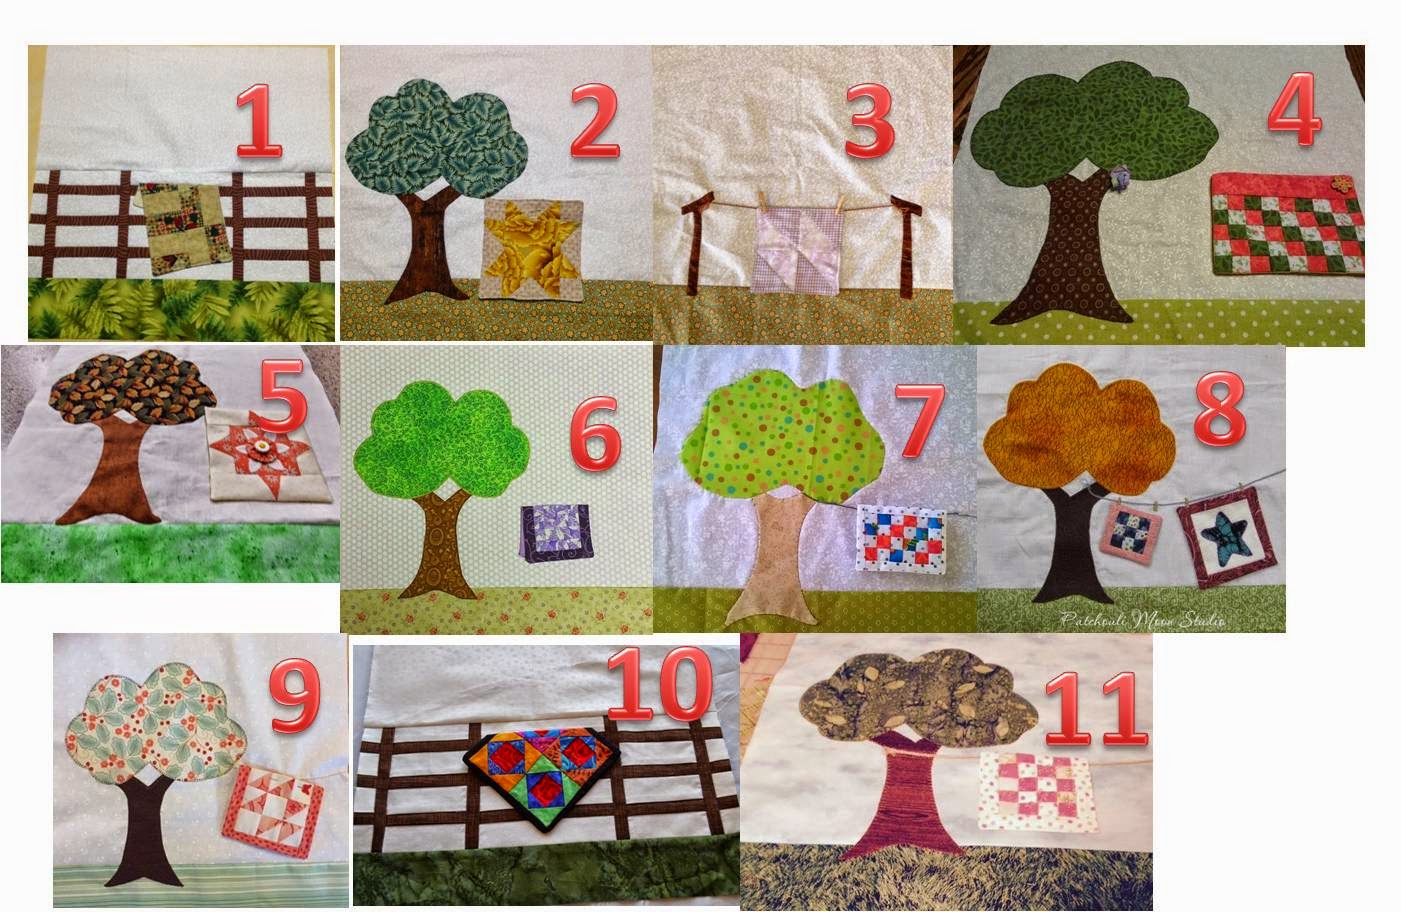 March - 21 "Quilts in the Garden" blocks.